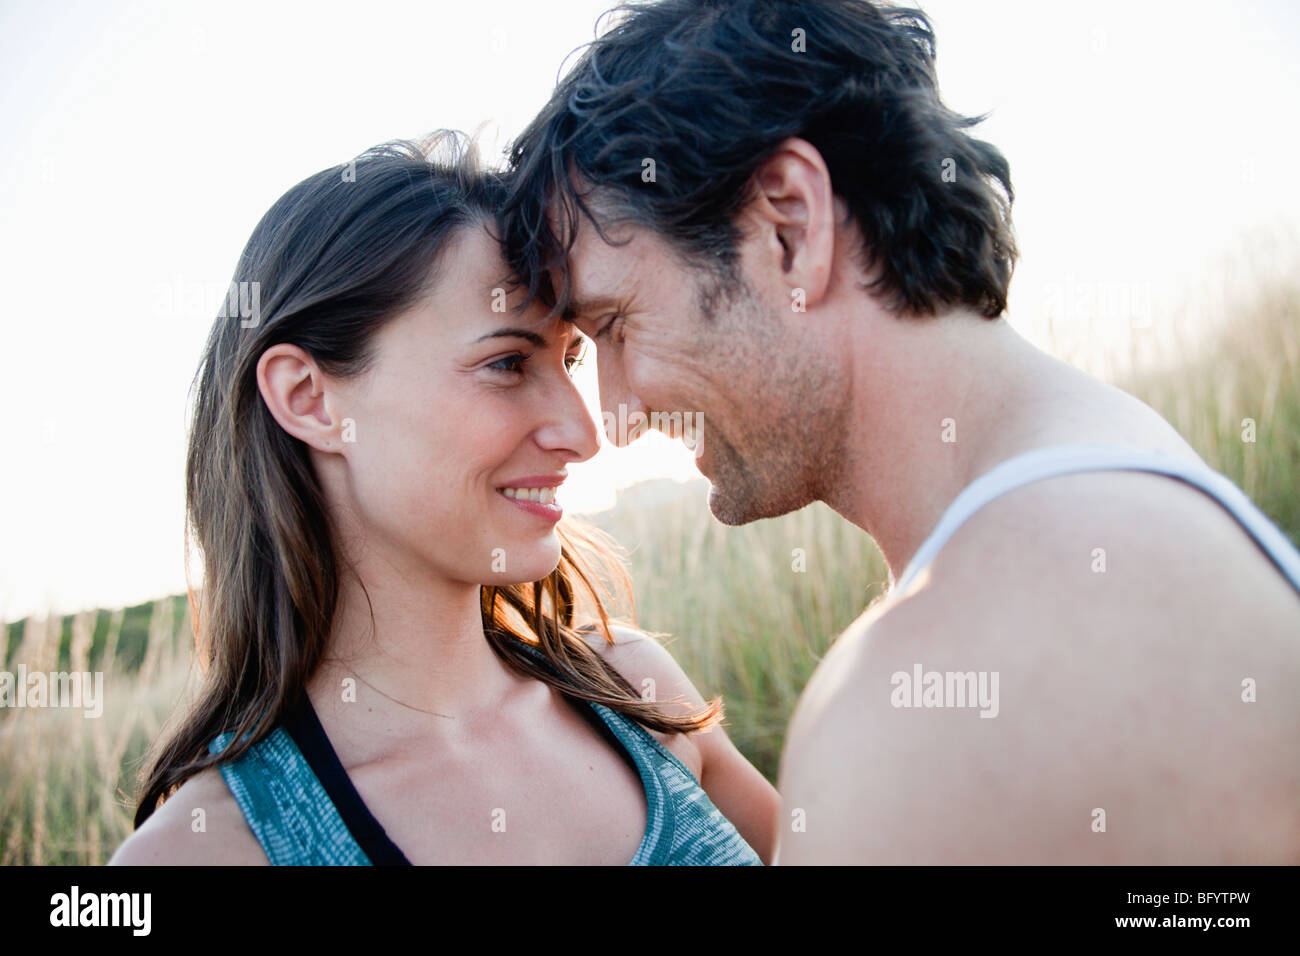 couple smiling at each other Stock Photo